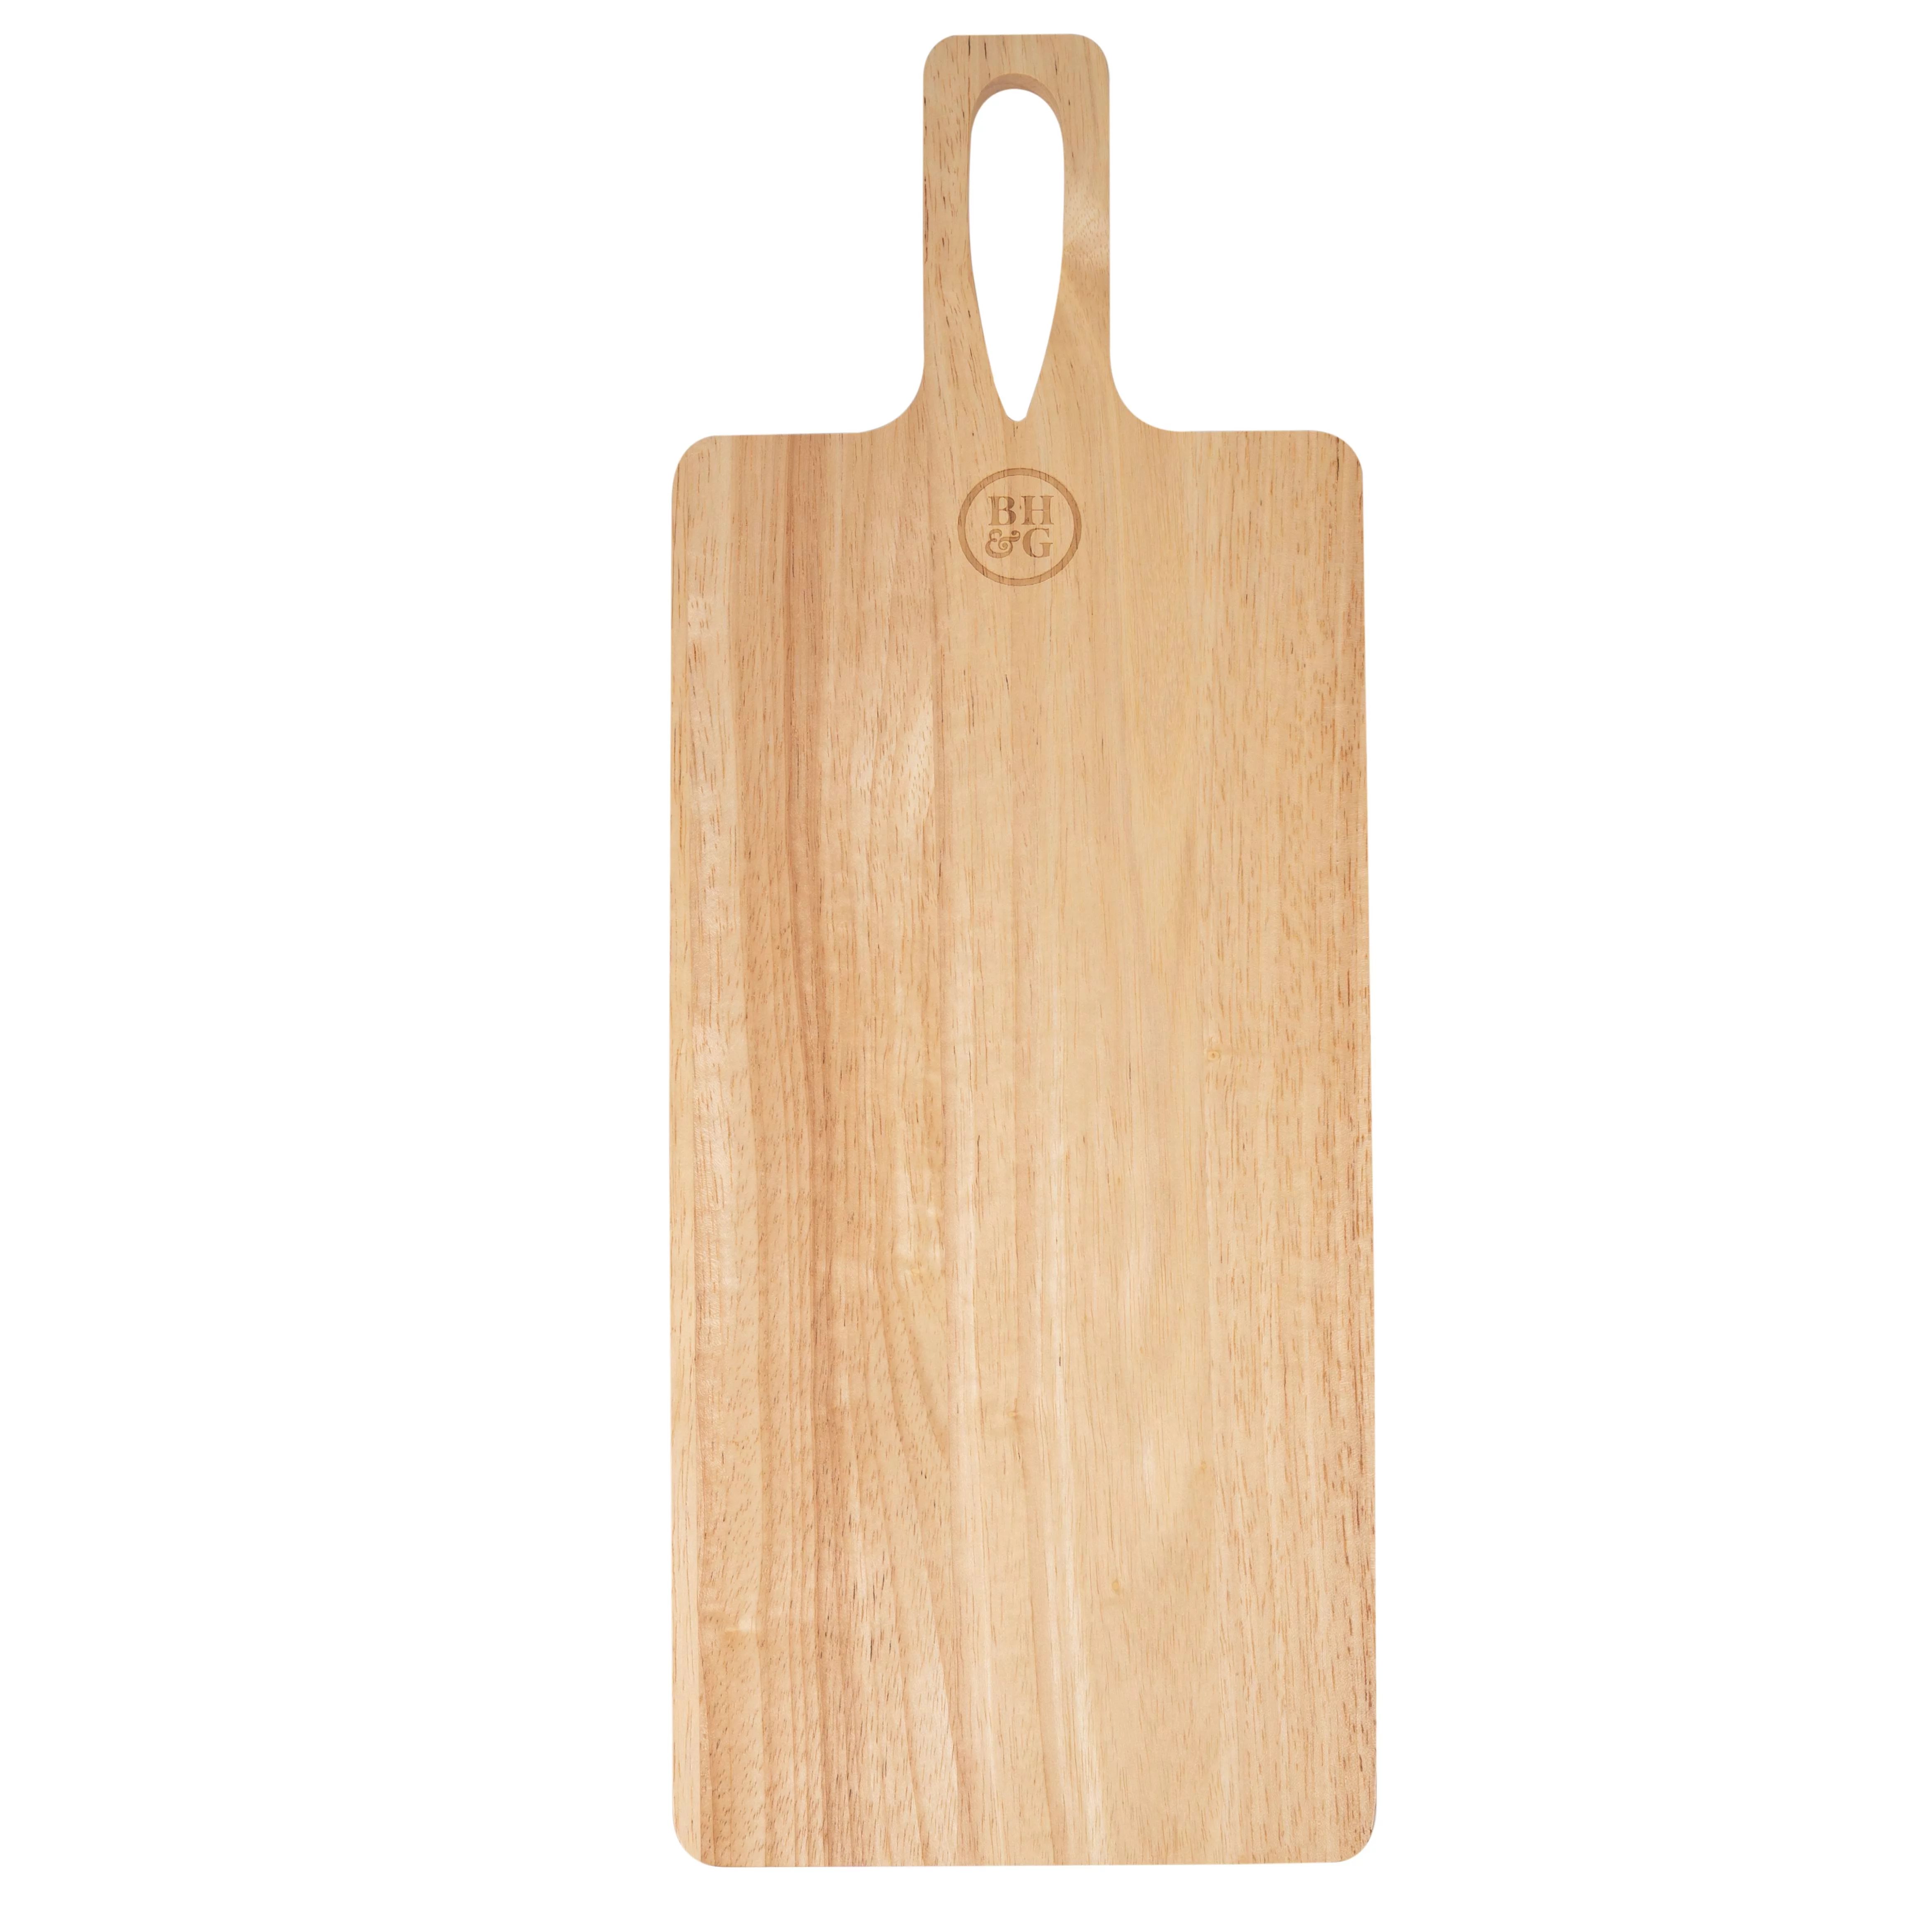 Better Homes & Gardens Charcuterie Board, Square, Color Natural Bamboo, 20.98W x 7.99D x 0.59H in | Walmart (US)